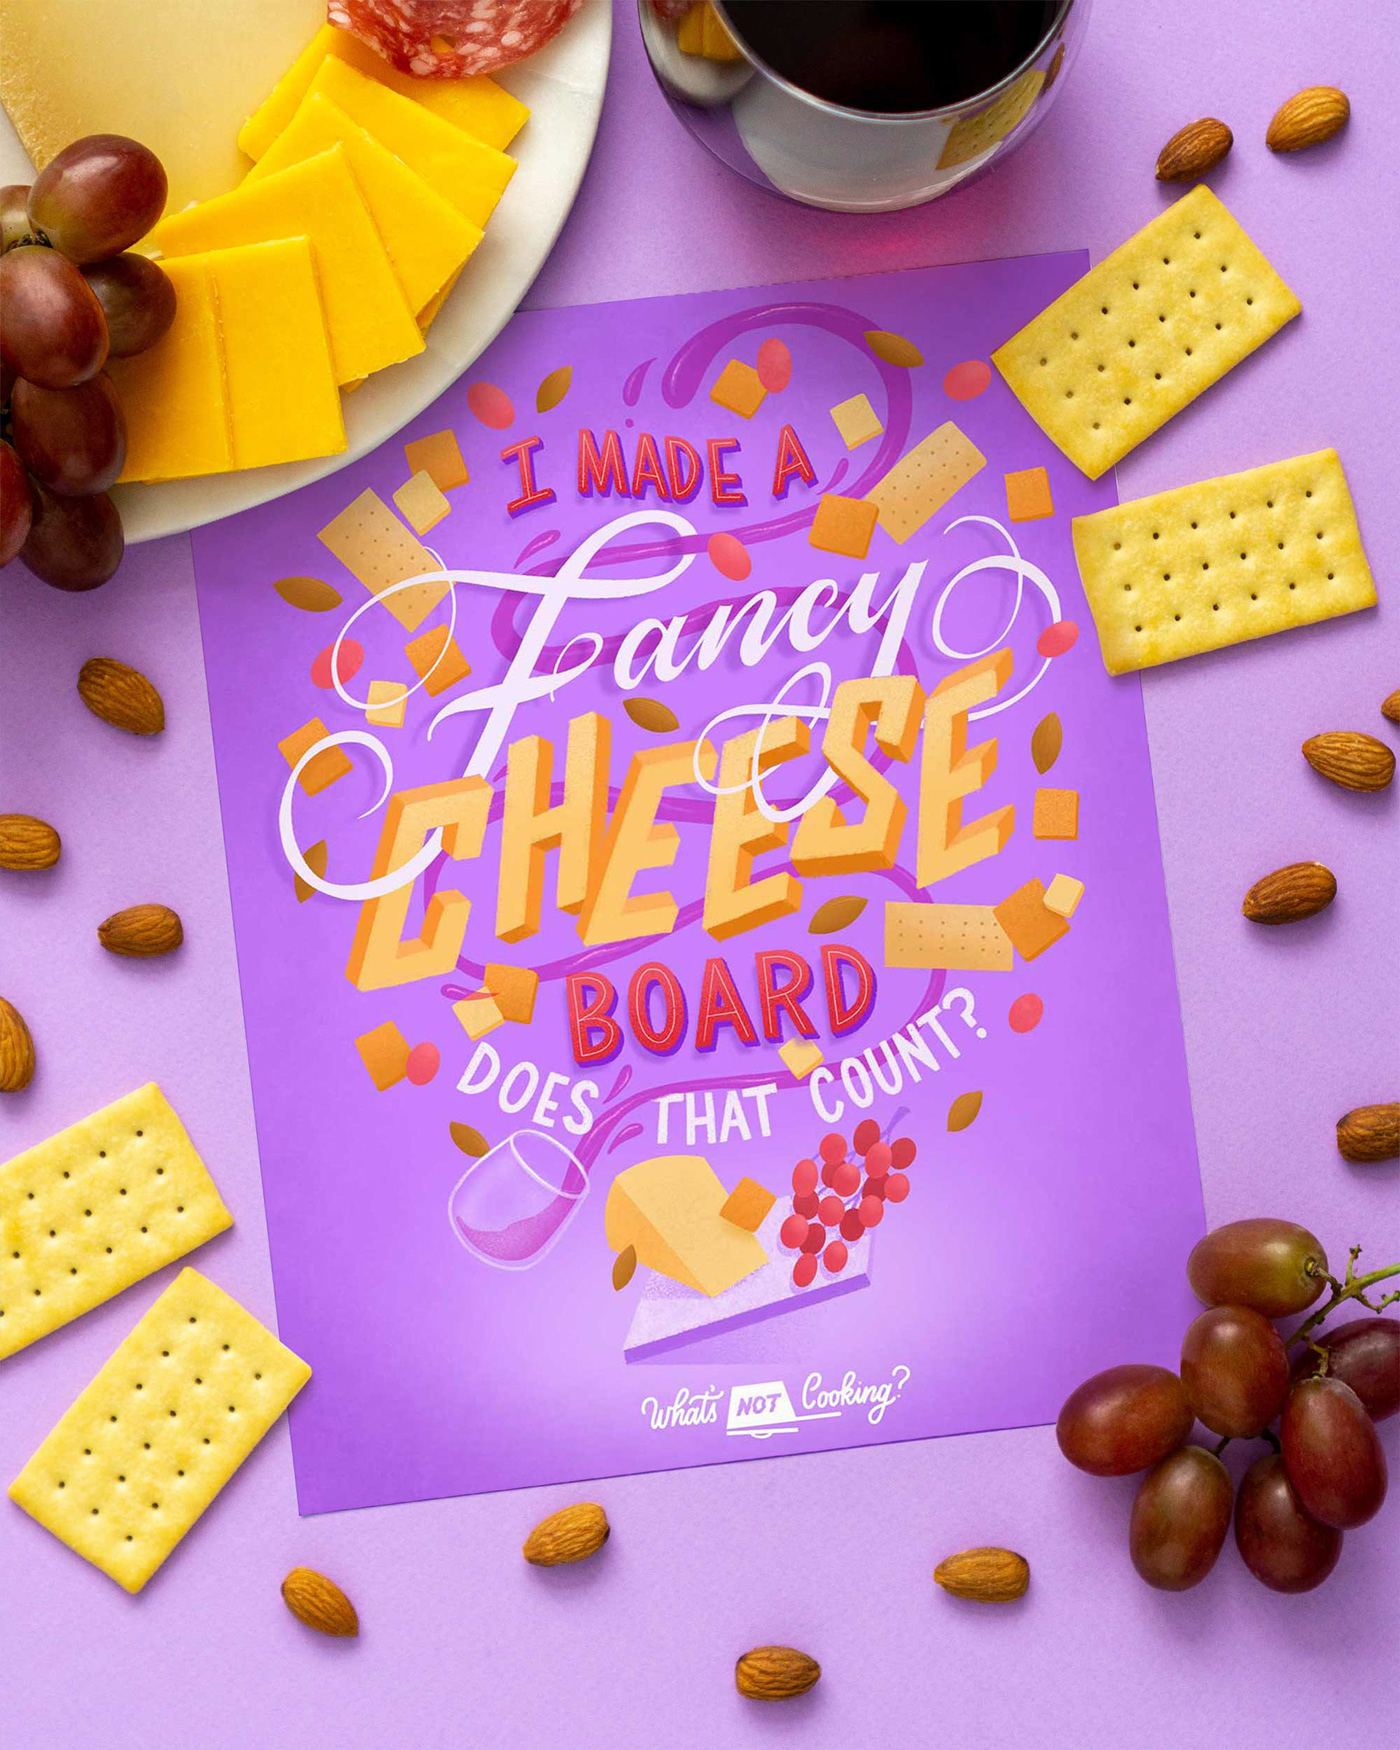 Hand lettering "i made a fancy cheese board, does that count?" with food illustrations and flay lay